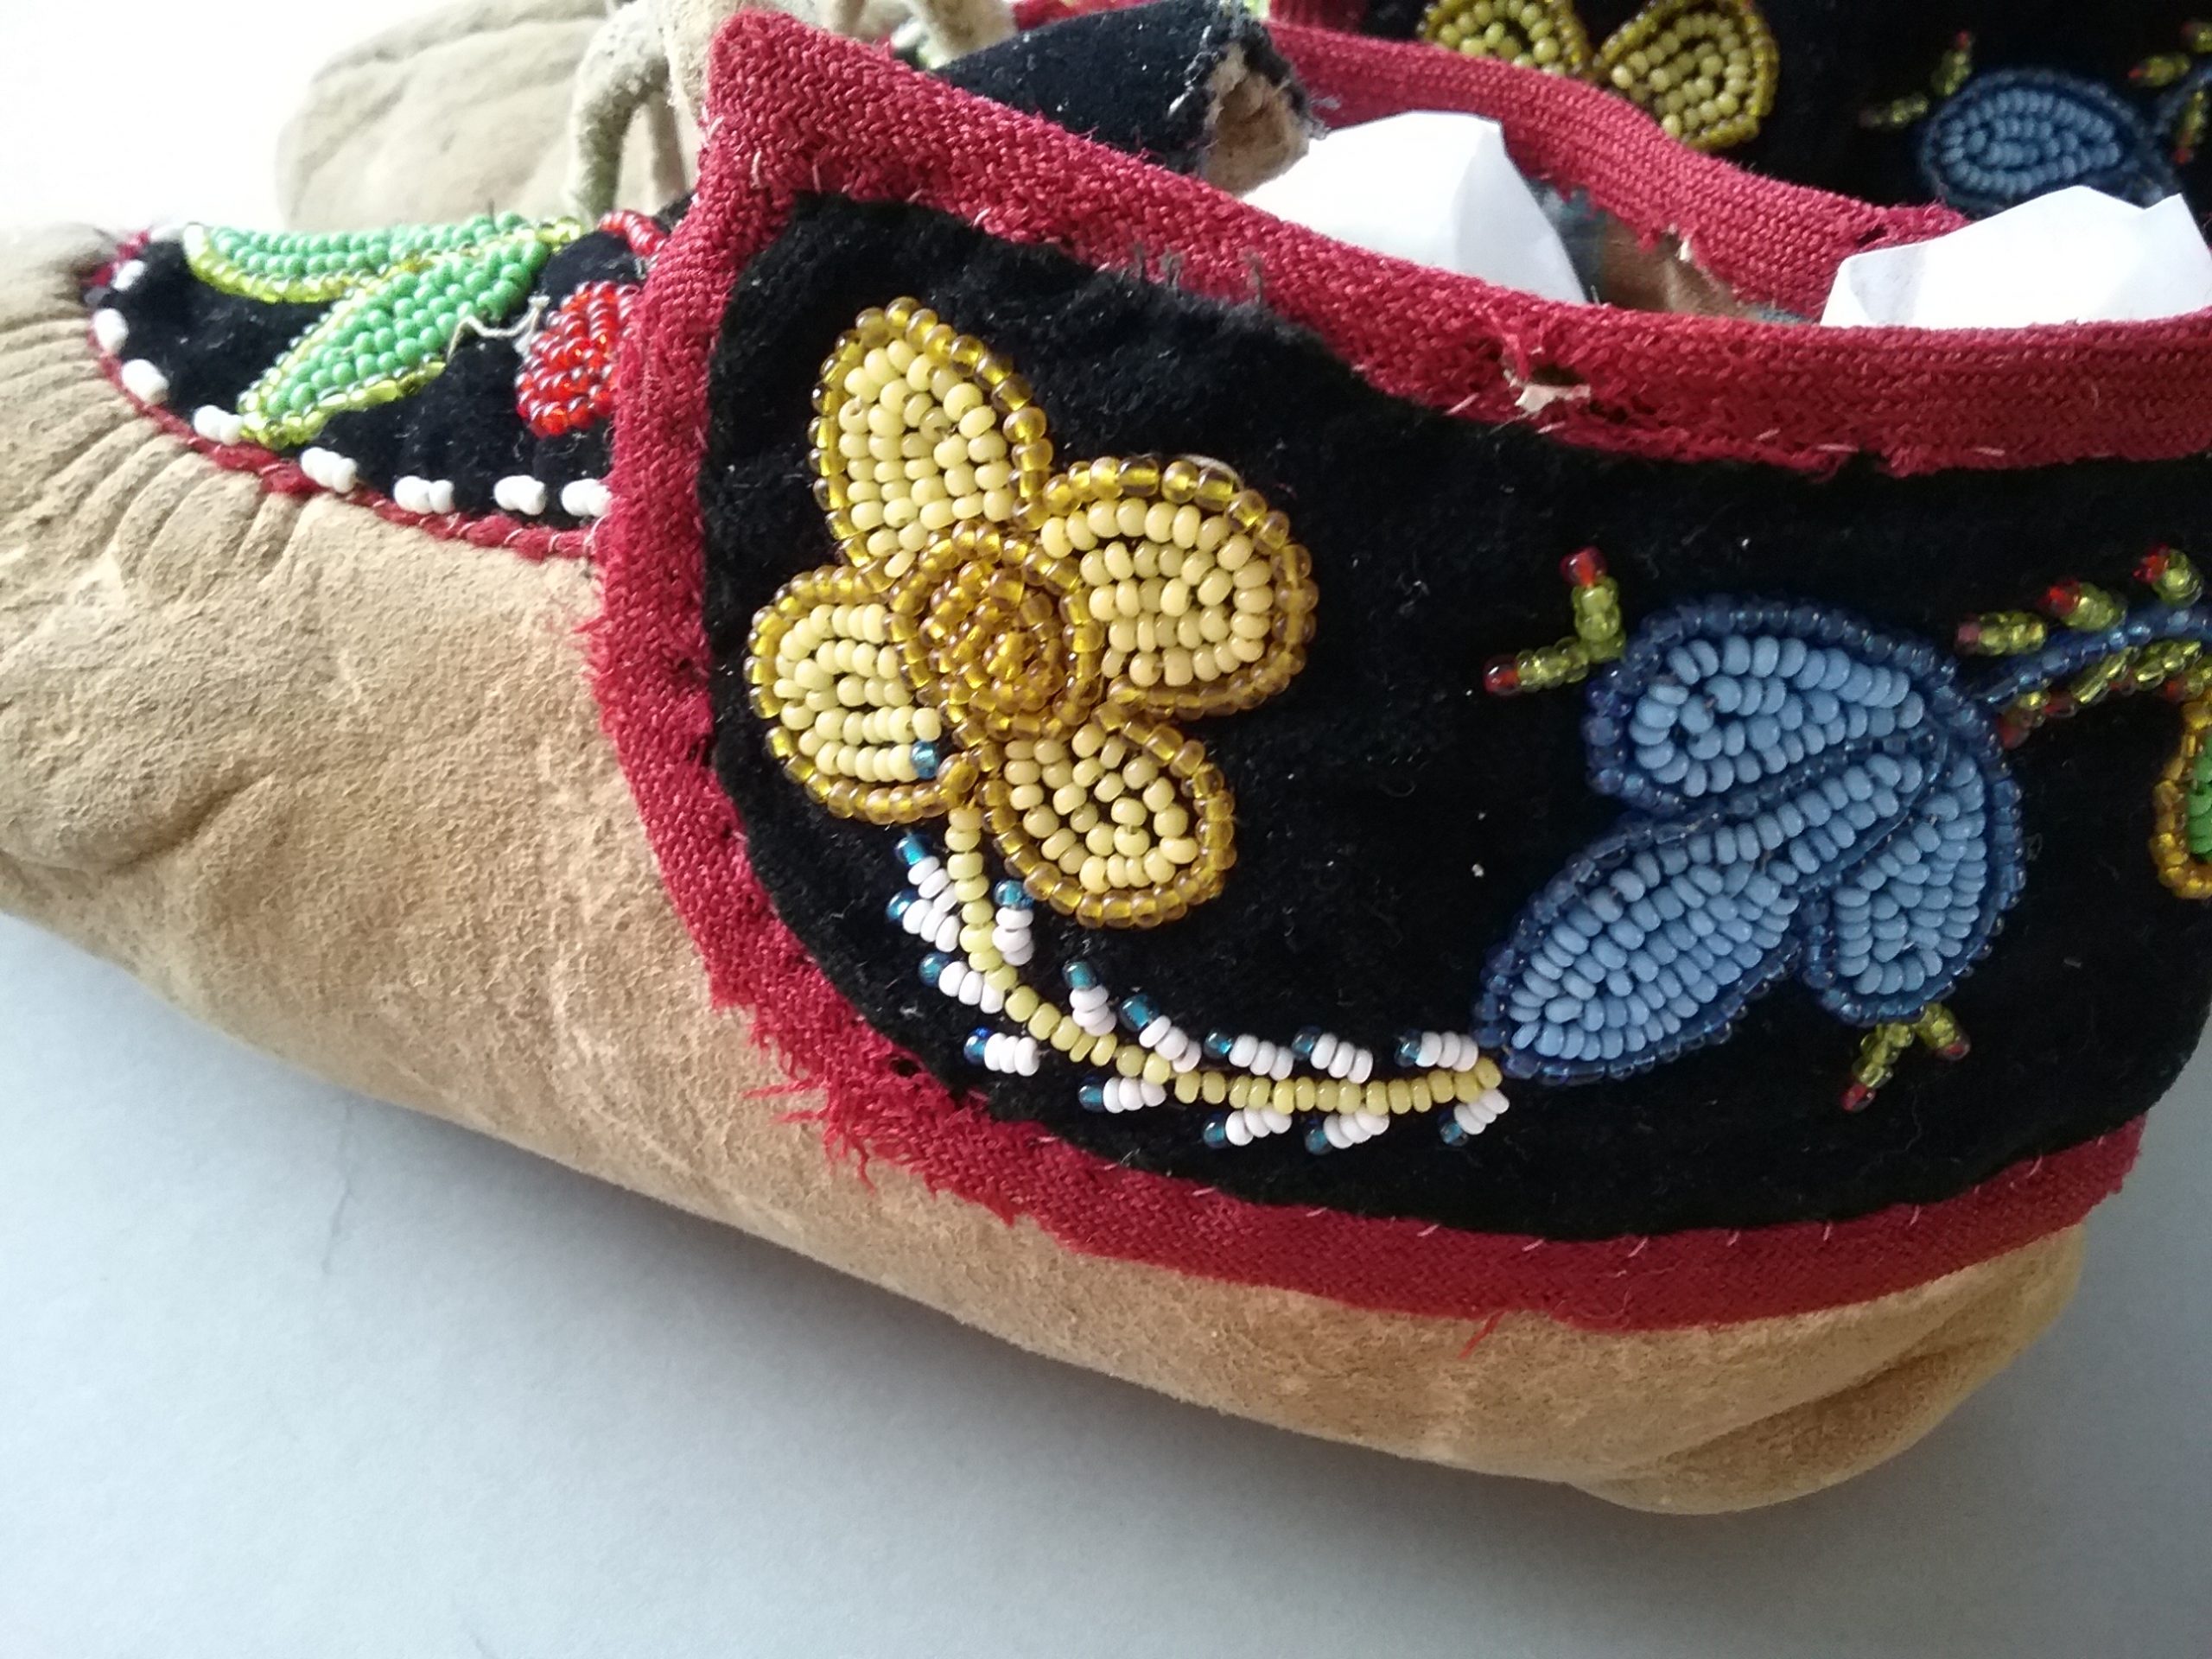 Detail on Ojibwe beaded leather moccasins. MCHS collections, #2005.97.27a&b